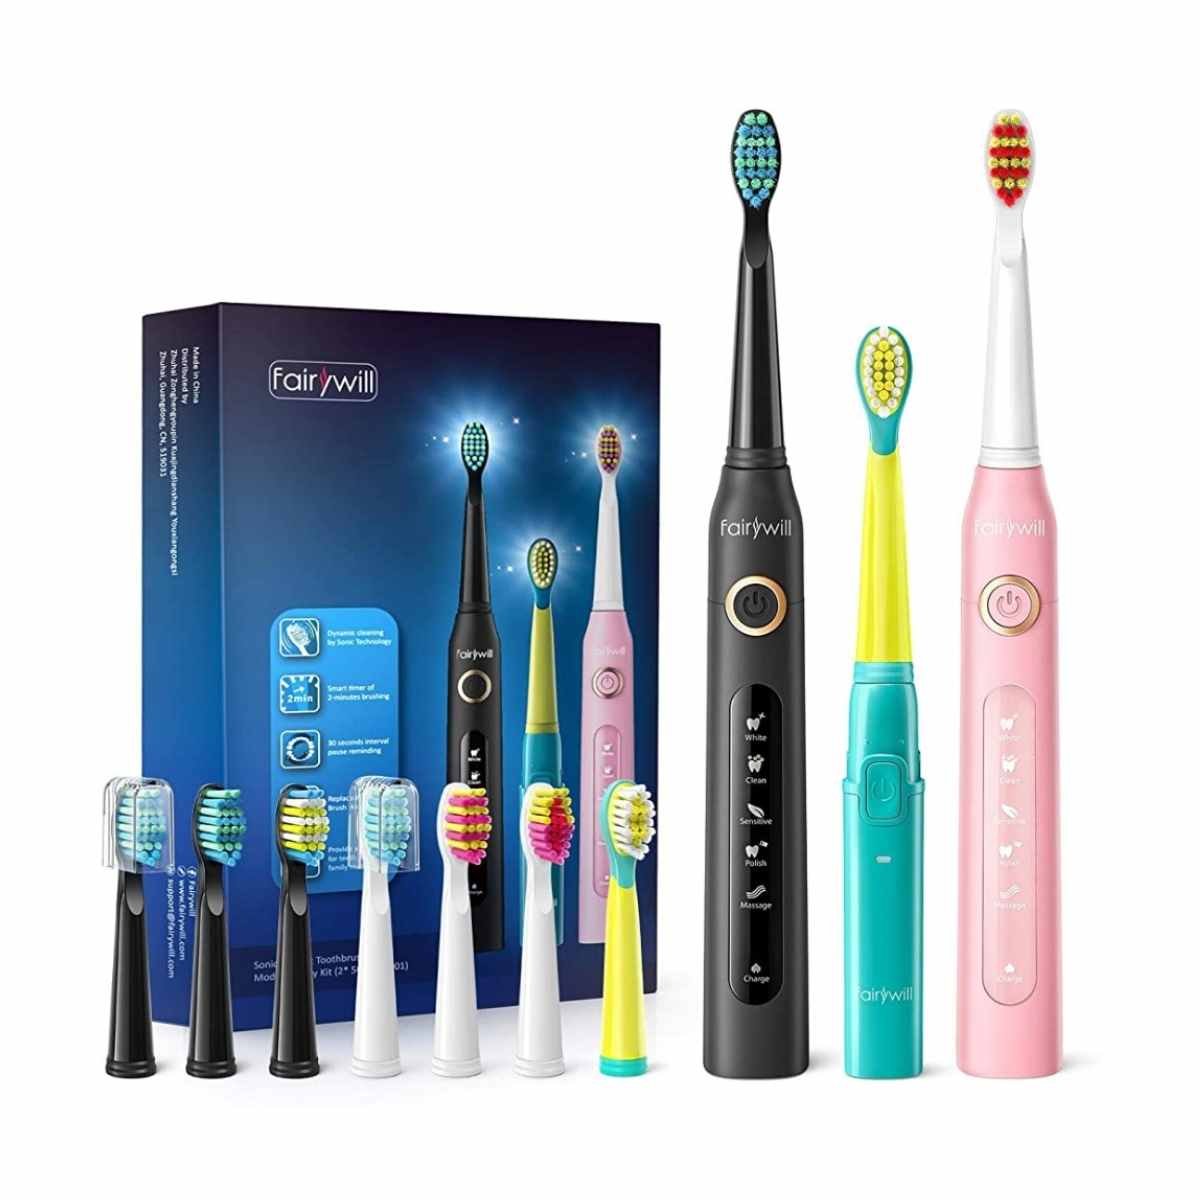 Fairywill Electric Toothbrush Family Kit